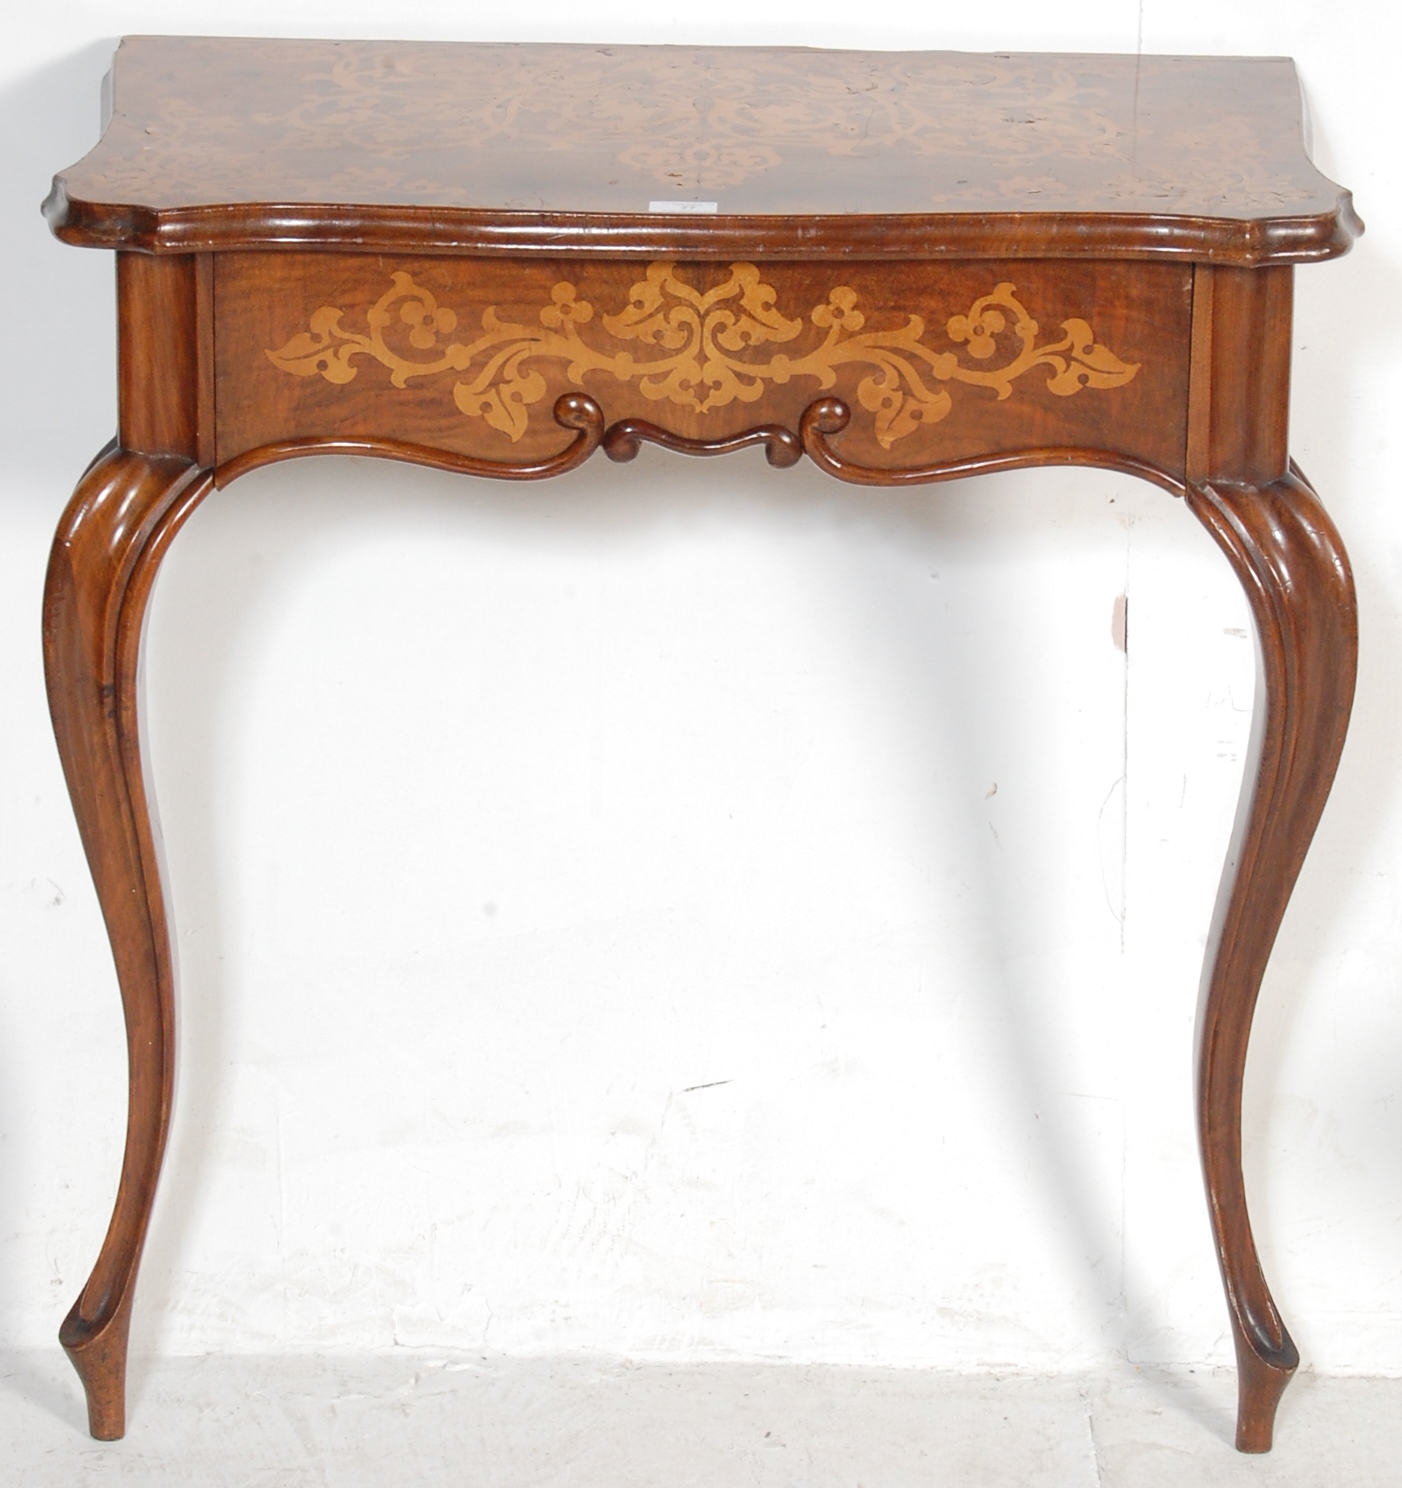 19TH CENTURY DUTCH WALNUT AND SATIN INLAID CONSOLE TABLE - Image 3 of 6